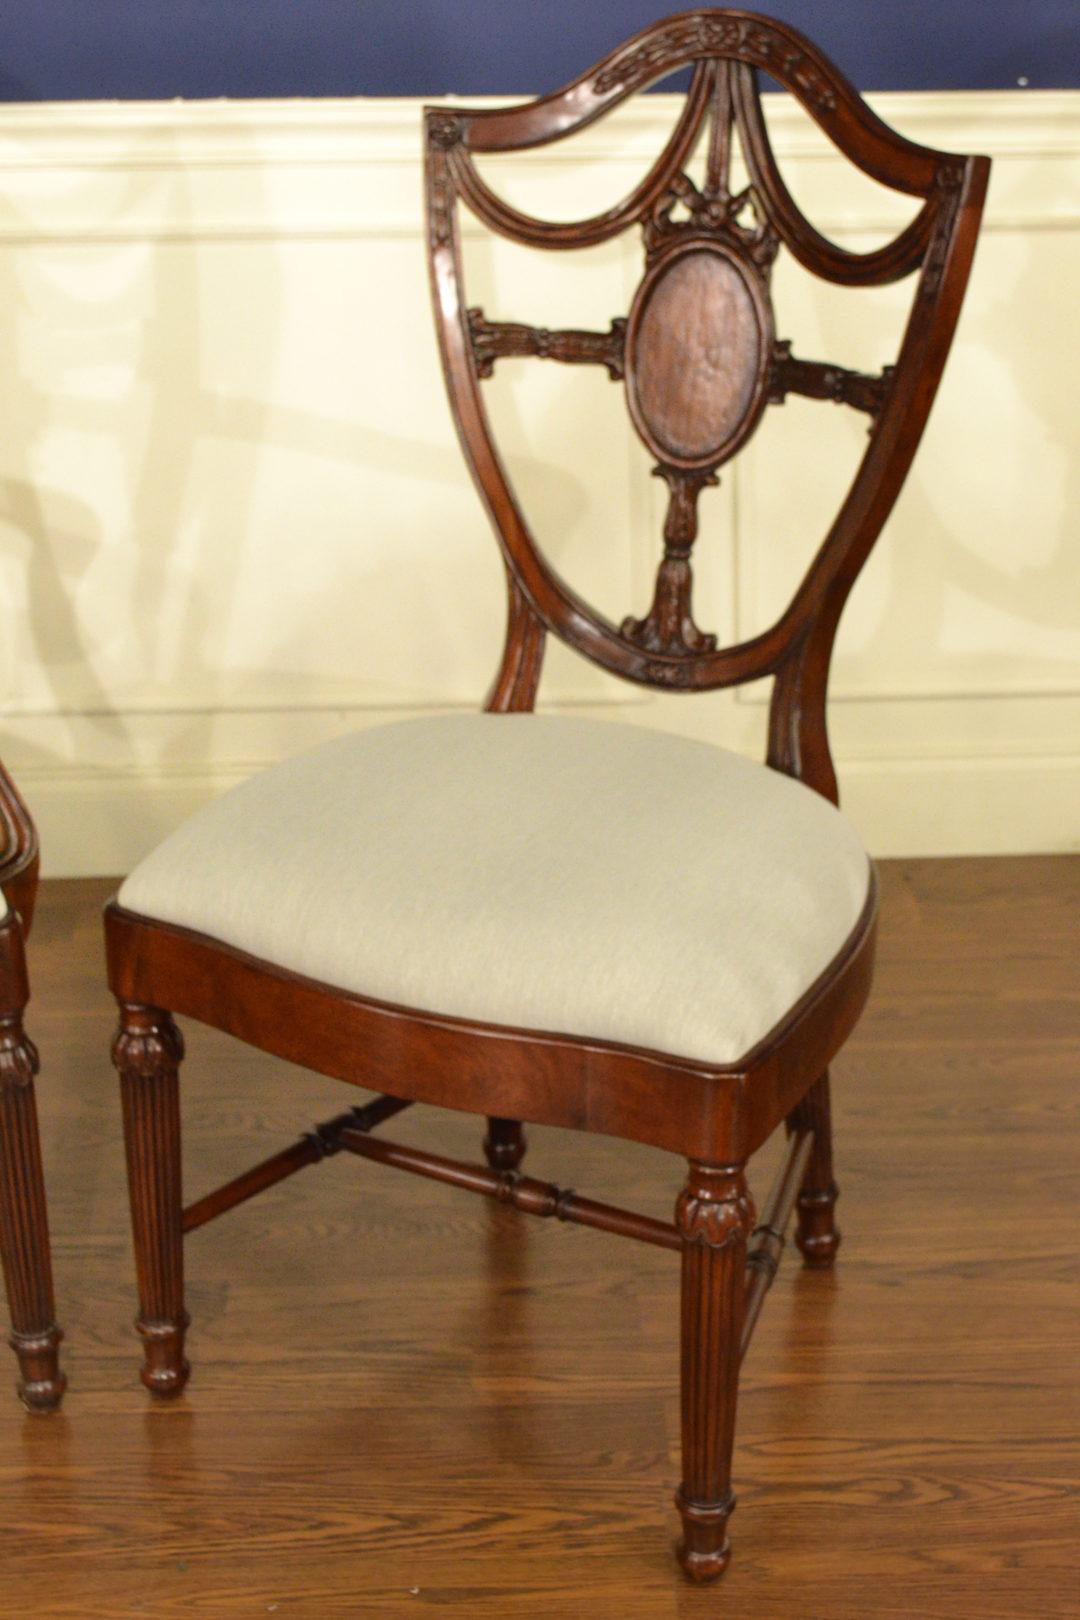 Regency Eight New Traditional Mahogany Inlaid Shieldback Dining Chairs by Leighton Hall